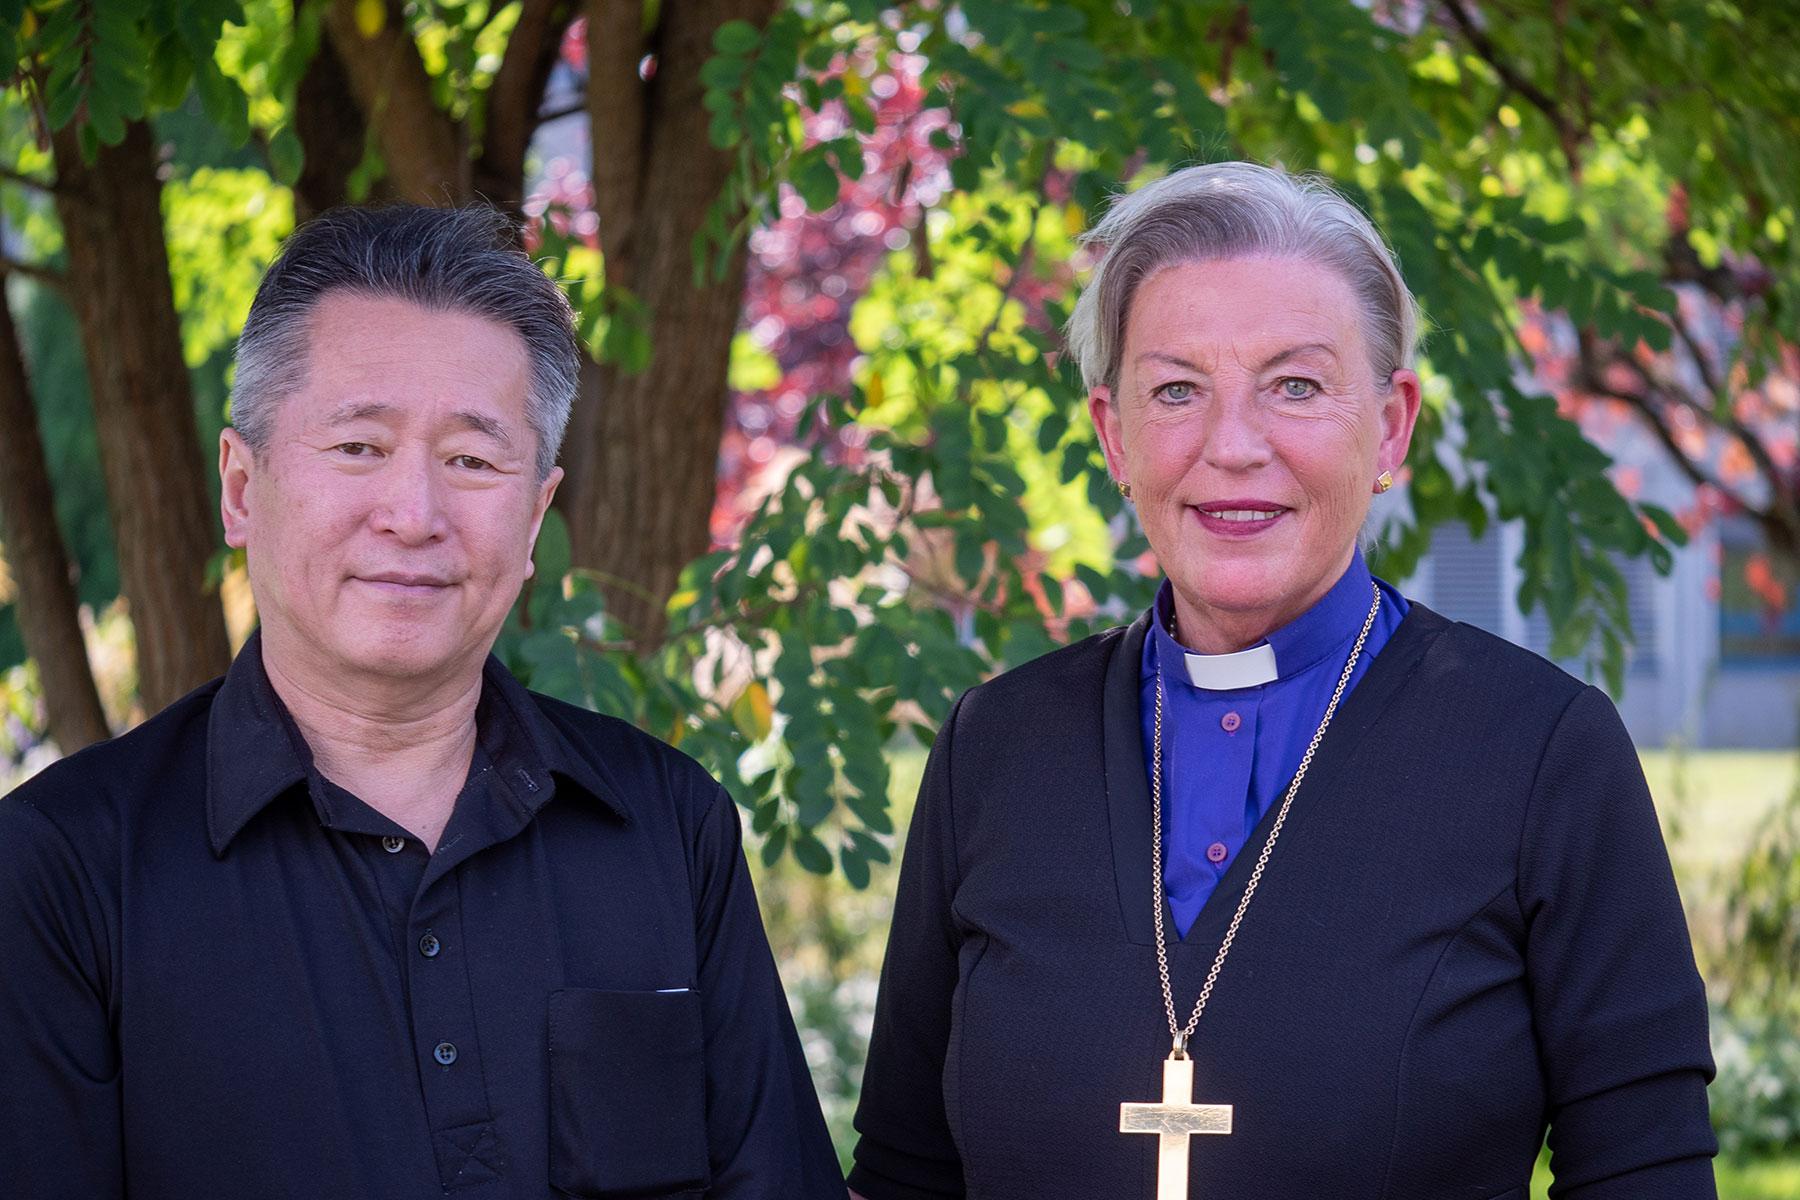 Rev. Toshiki Toma and Bishop of HÃ³lar Diocese Solveig Lara Gudmundsdottir at the LWF Ecumenical Center in 2019. Rev. Toshiki Toma of the International Congregation in BreiÃ°holts Church is pastor to immigrants and refugees at the Evangelical Lutheran Church of Iceland. Photo: LWF/A. Danielsson